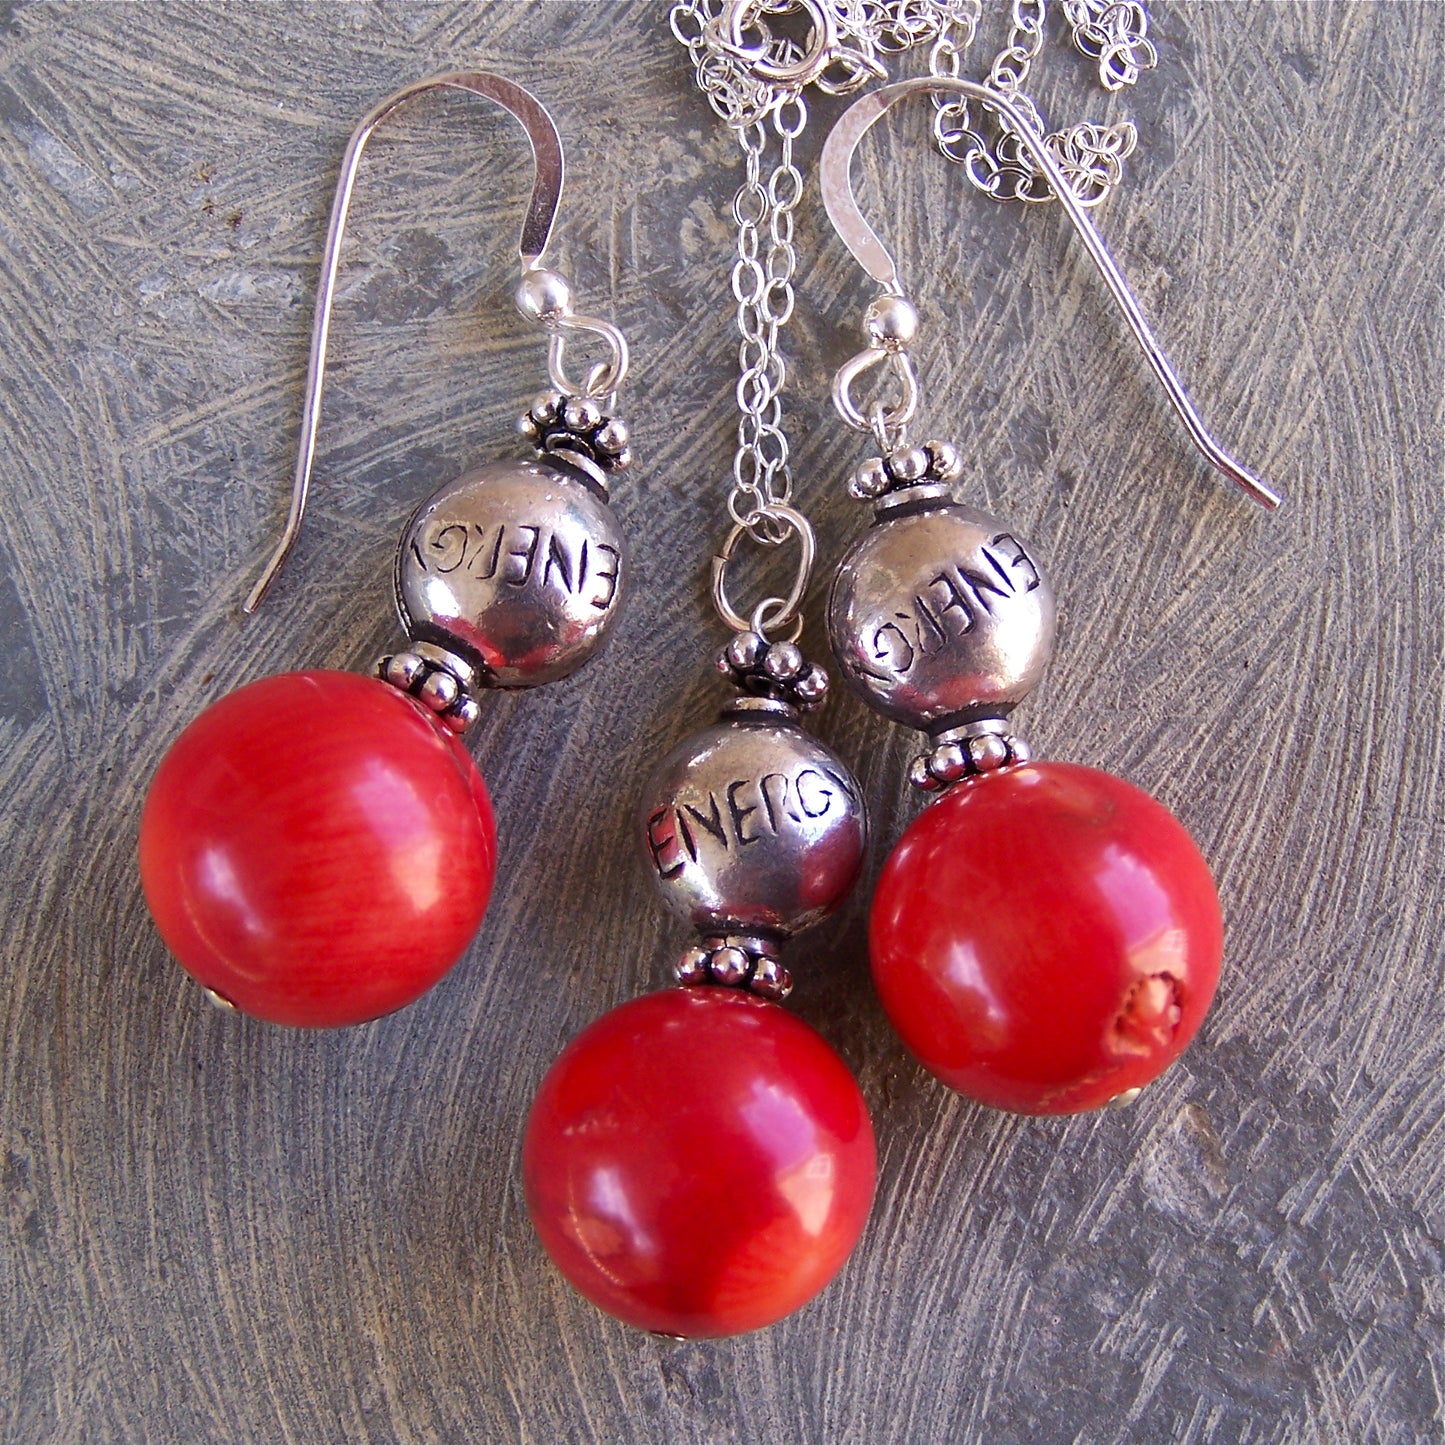 Sale! Red Coral, Sterling Silver "ENERGY" Affirmation Message Earrings and Pendant Set